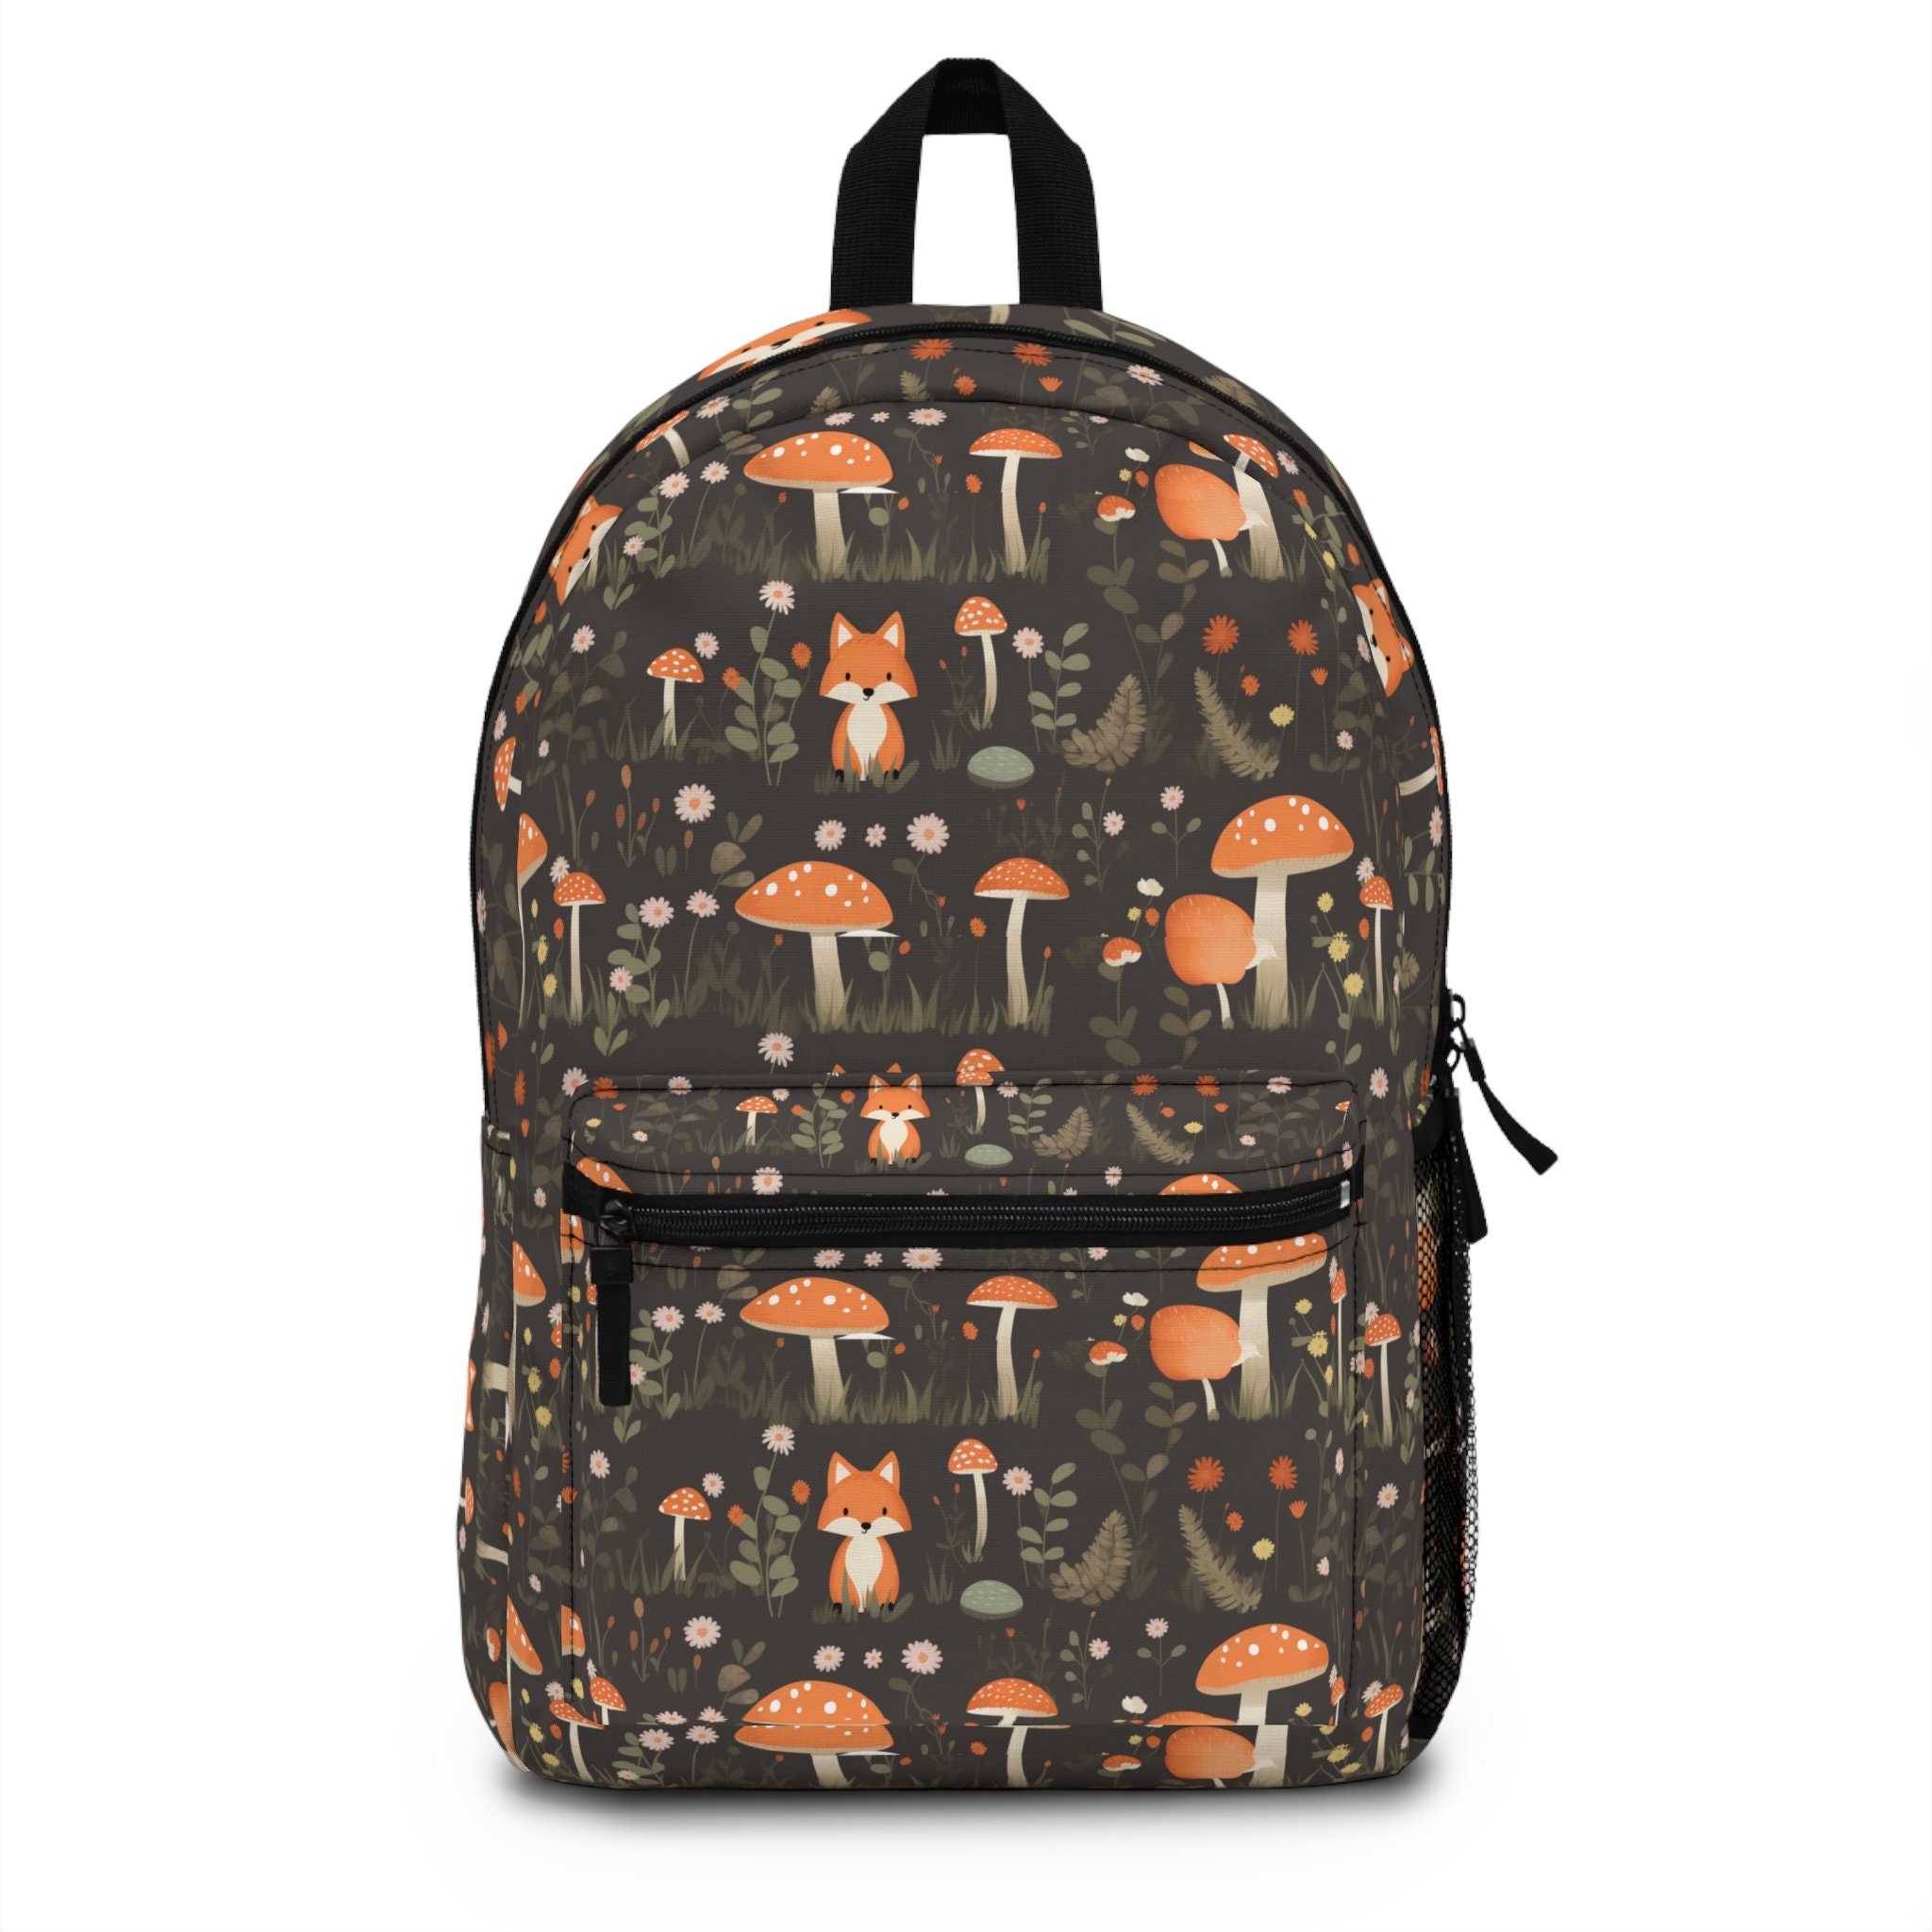 Discover Fox in the Forest Fox Backpack